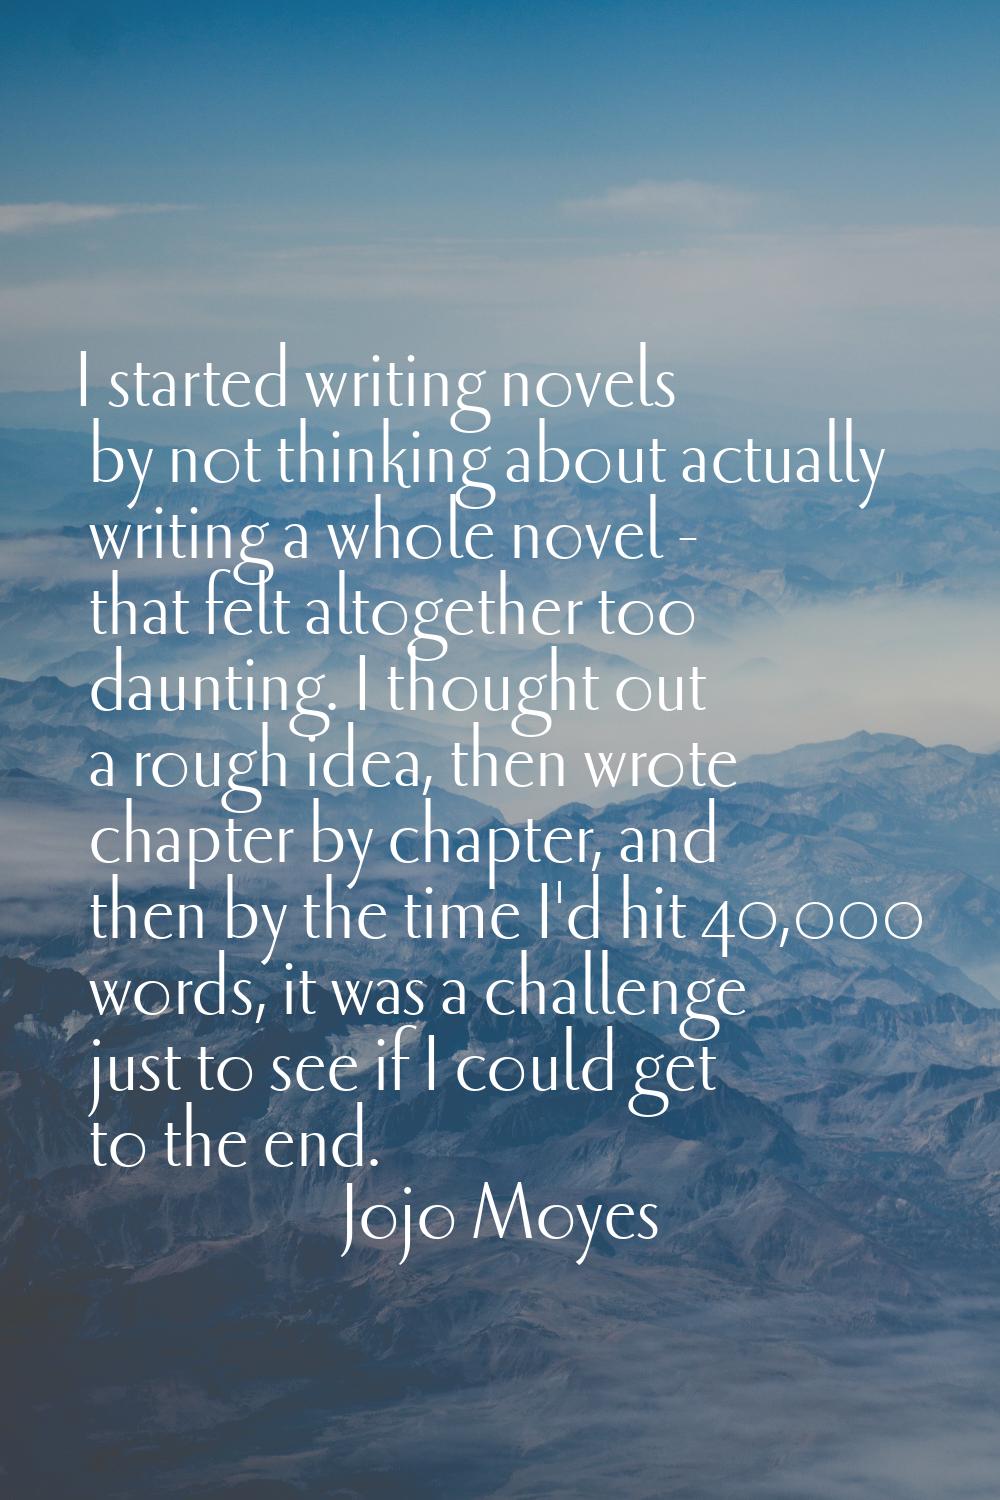 I started writing novels by not thinking about actually writing a whole novel - that felt altogethe